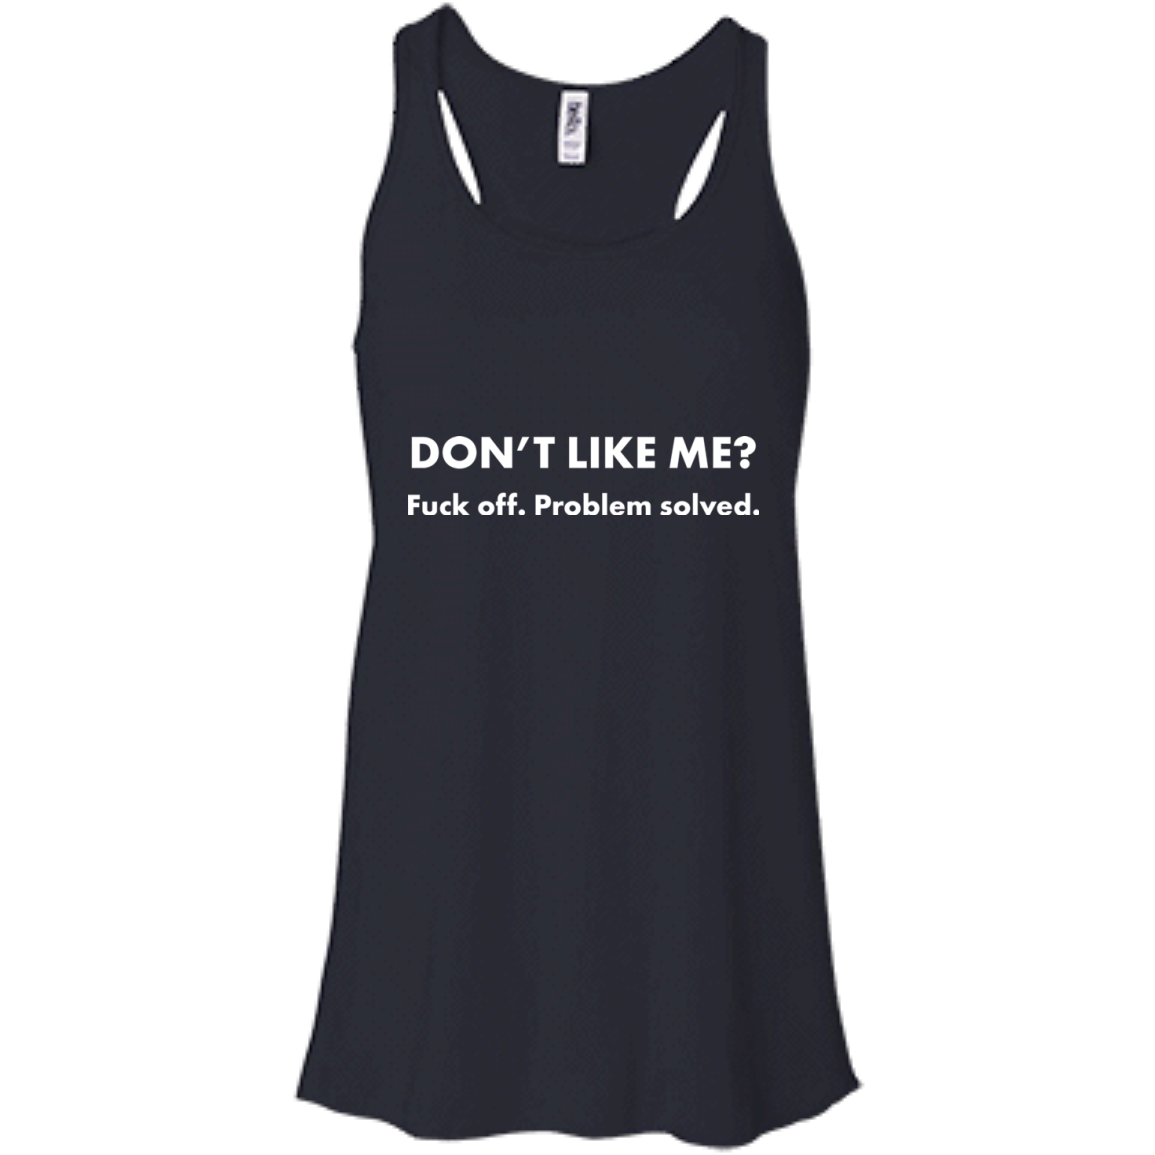 DON/'T LIKE ME PROBLEM SOLVED FUNNY OFFENSIVE RUDE TEES UNISEX T-SHIRT T929